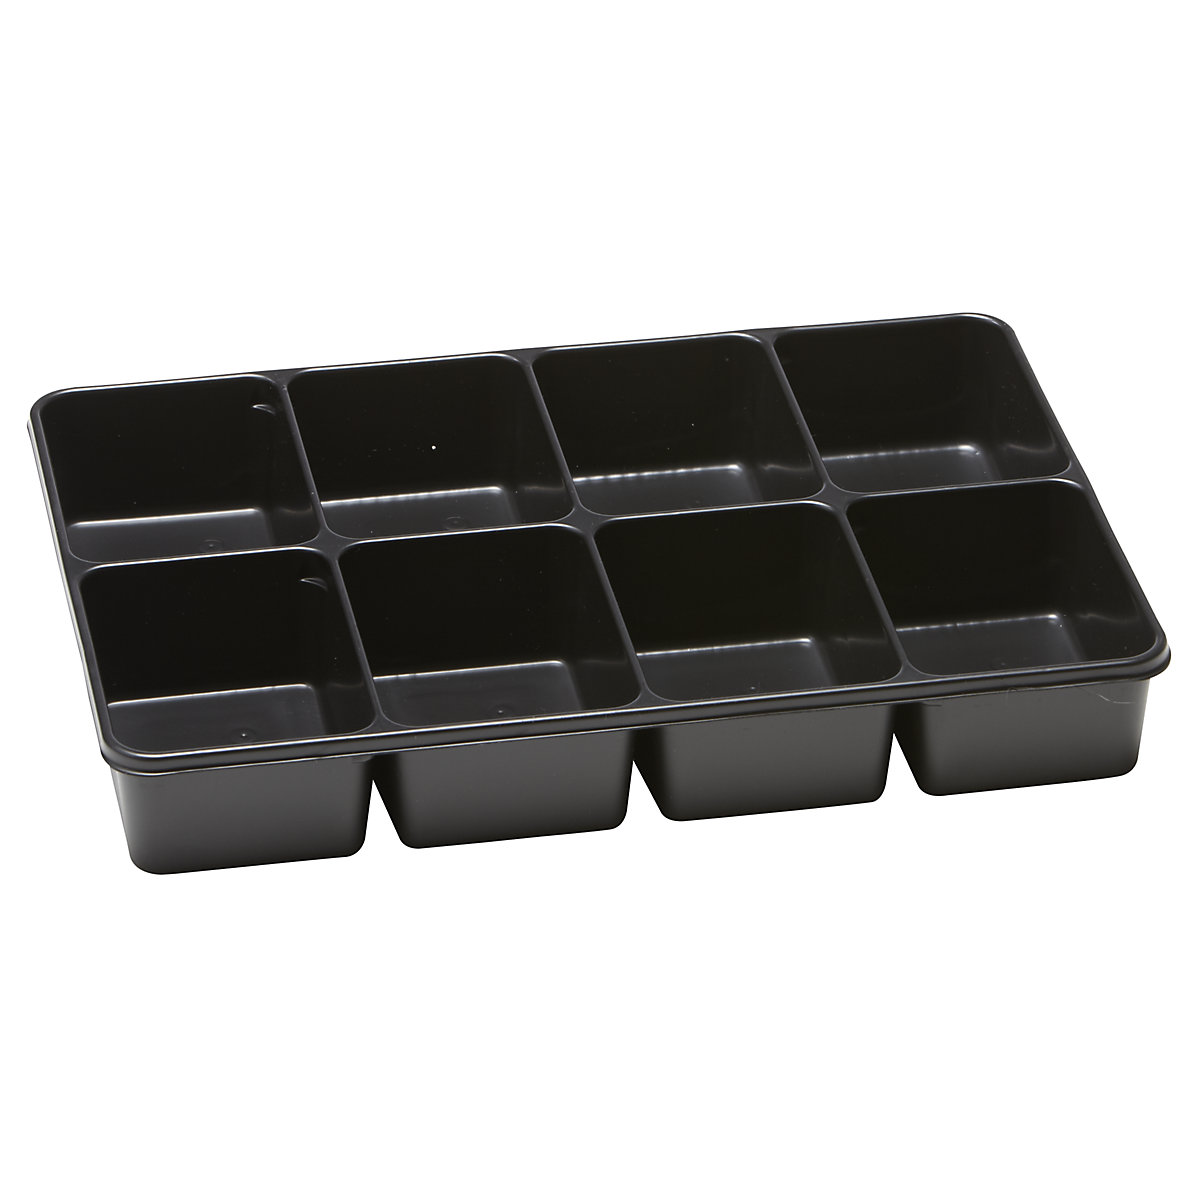 Inserts, pack of 10, polystyrene, black, division into 8 compartments-5